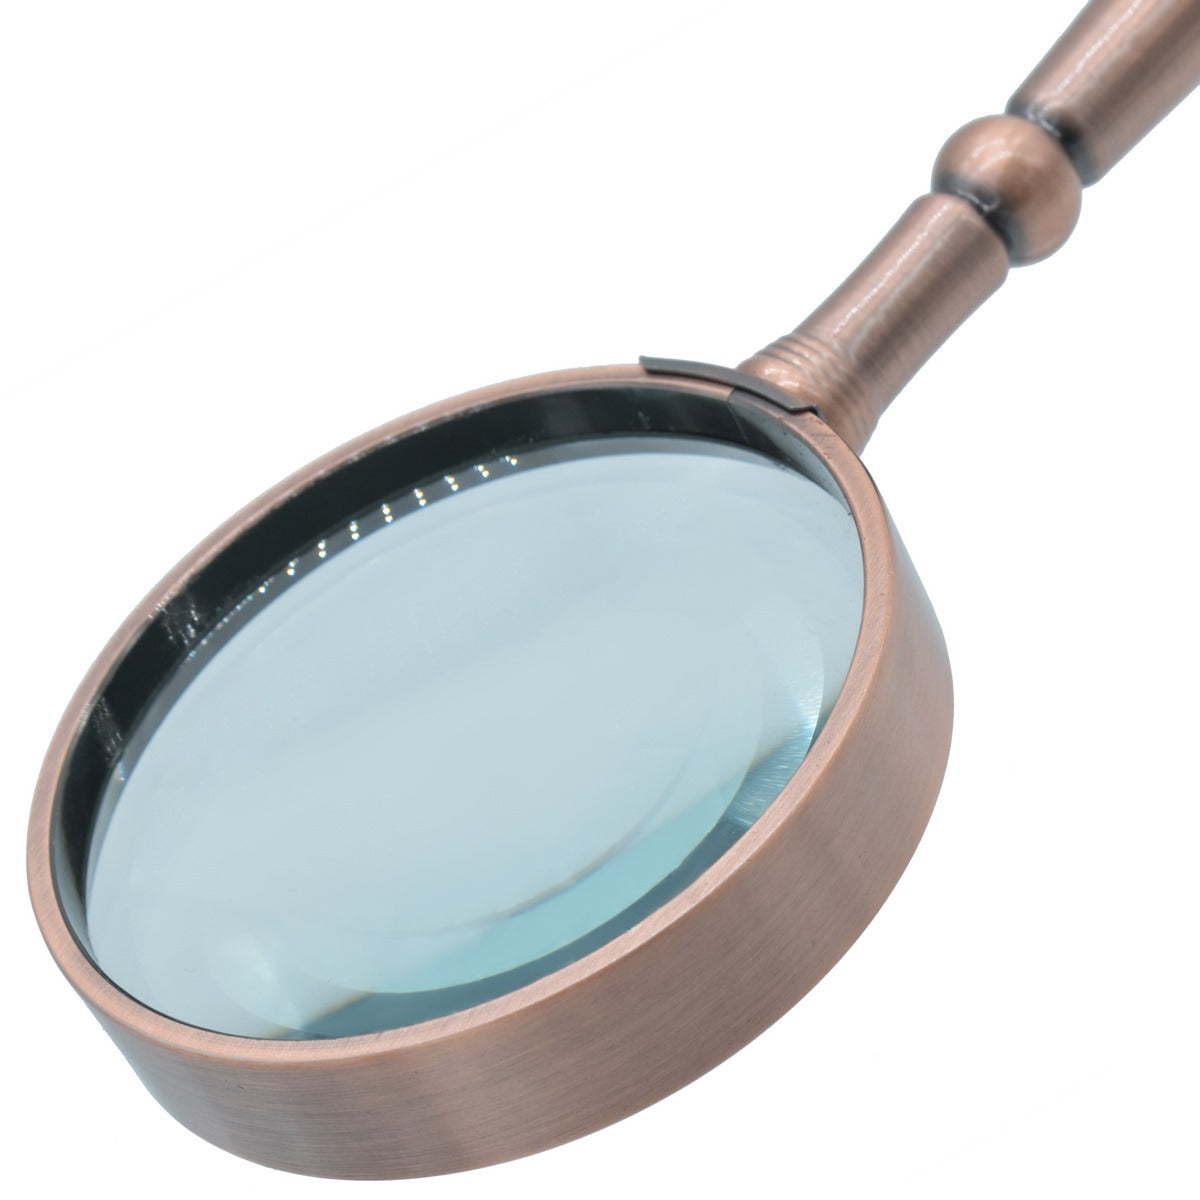 jags-mumbai Office Desk Stationery Magnified Glass 75mm Cooper MGCR75MM